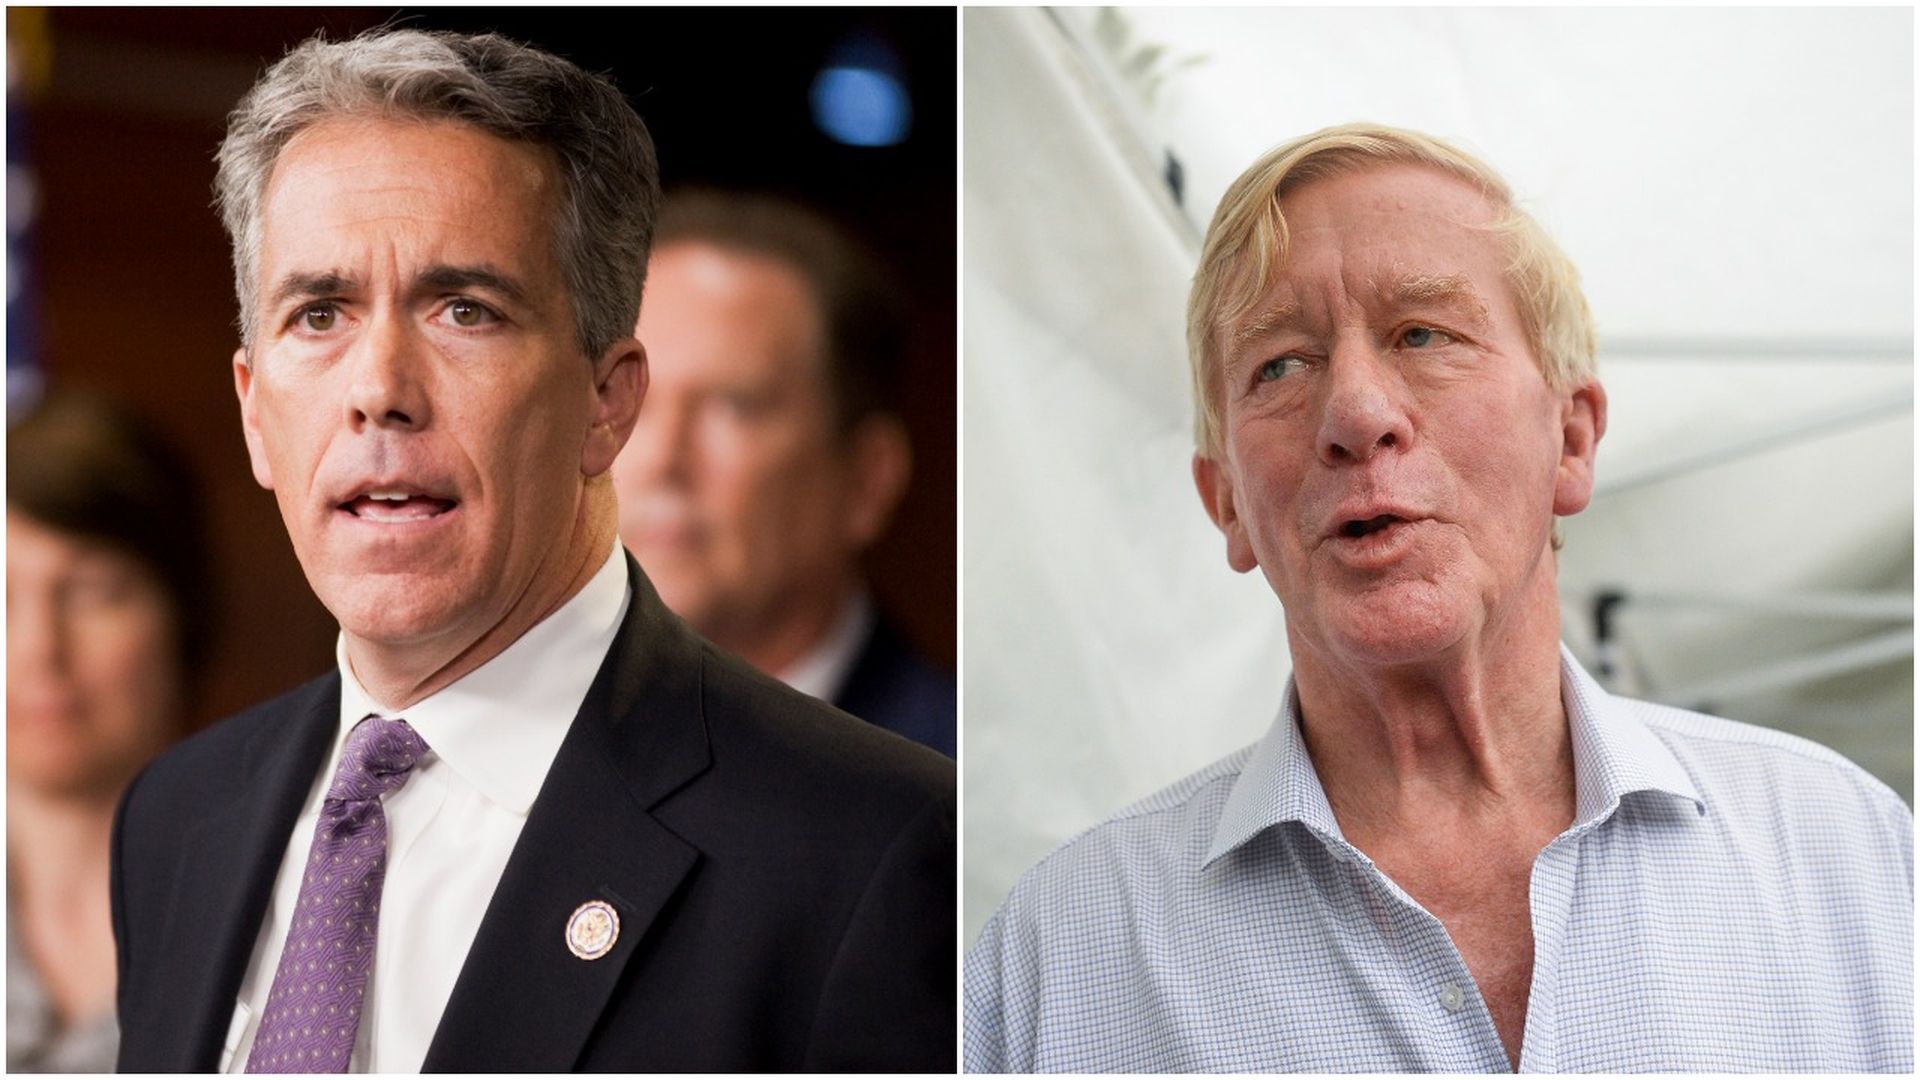 This image is a two-way split screen of Joe Walsh and Bill Weld.